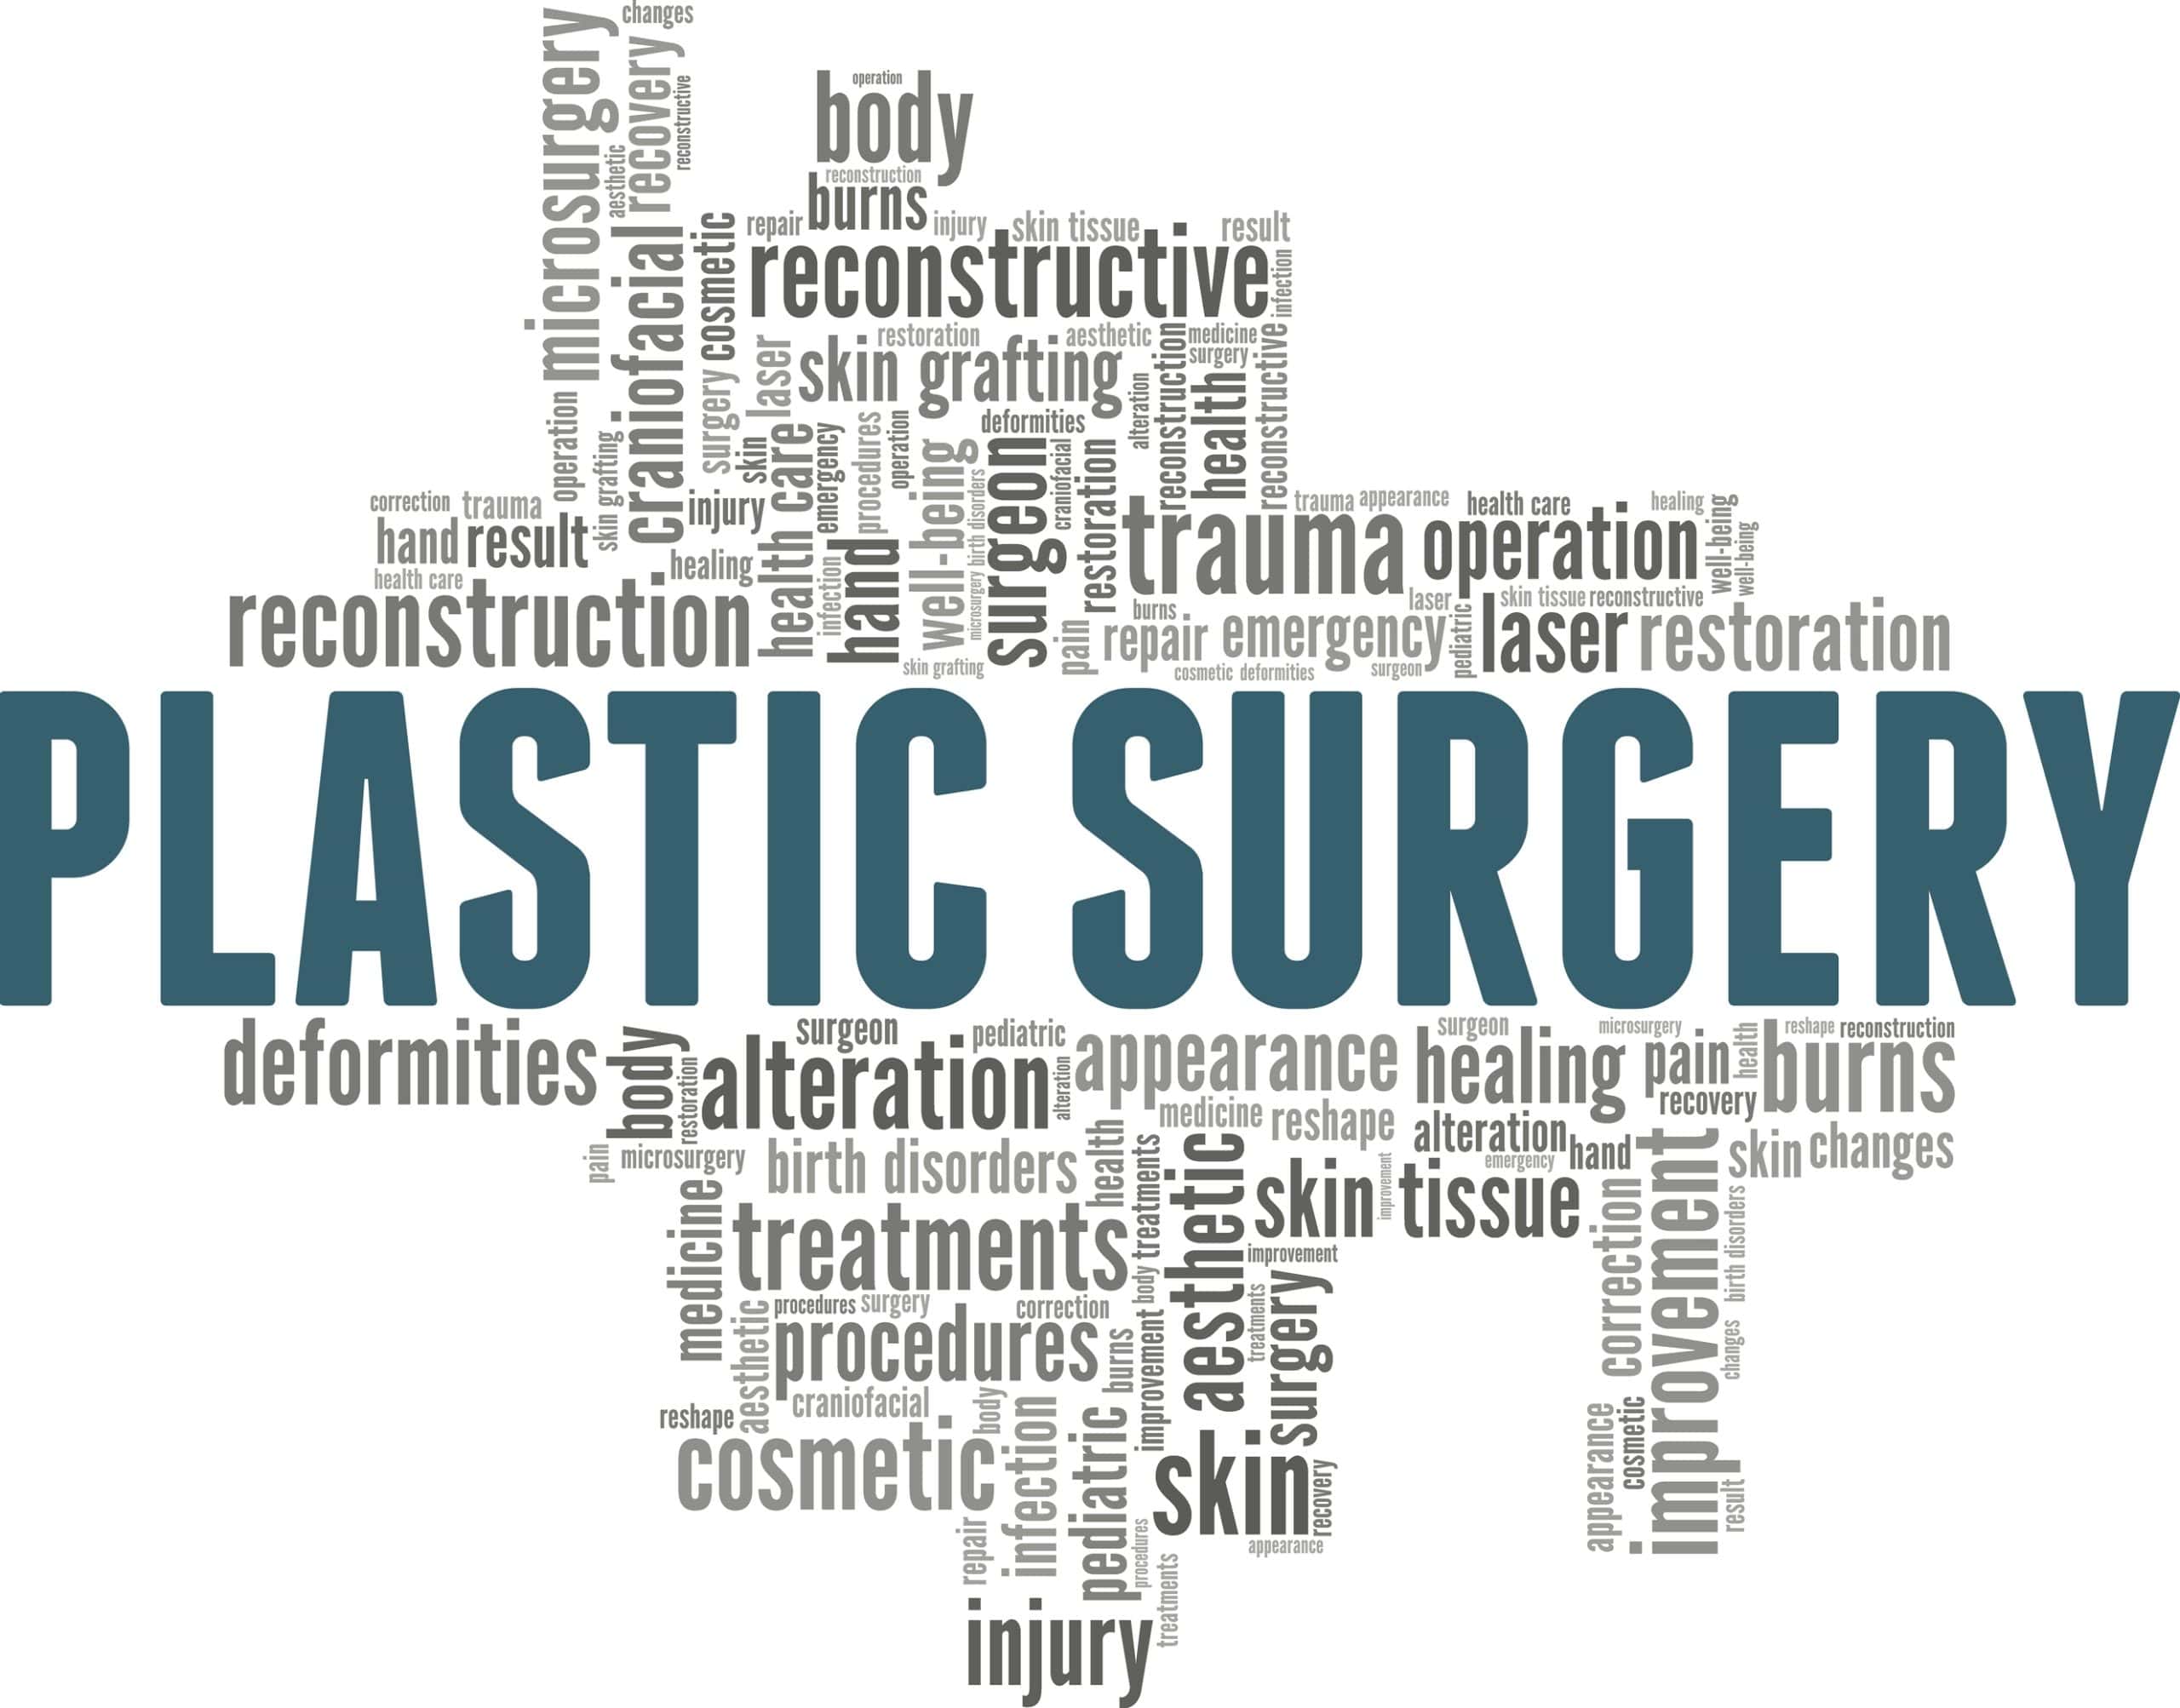 How Cosmetic Surgery and Reconstructive Surgery Intersect